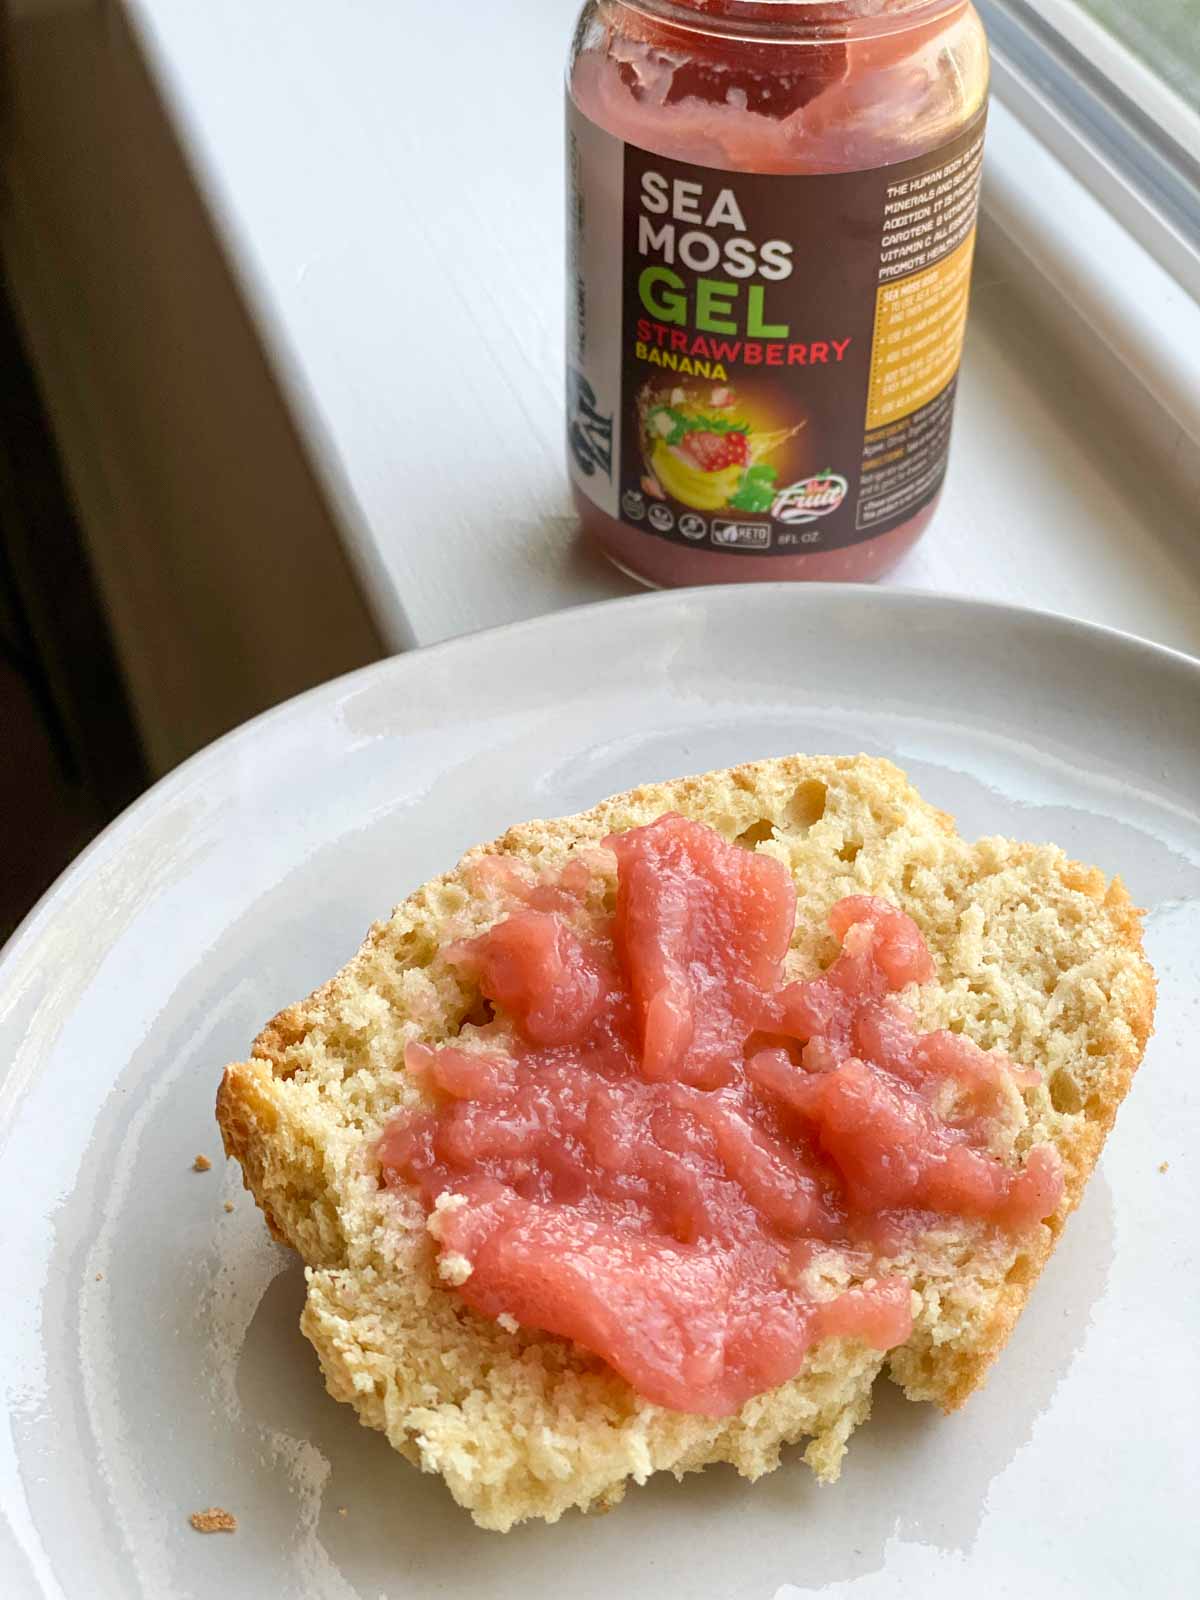 strawberry banana sea moss gel used as jam on piece of bread on white plate